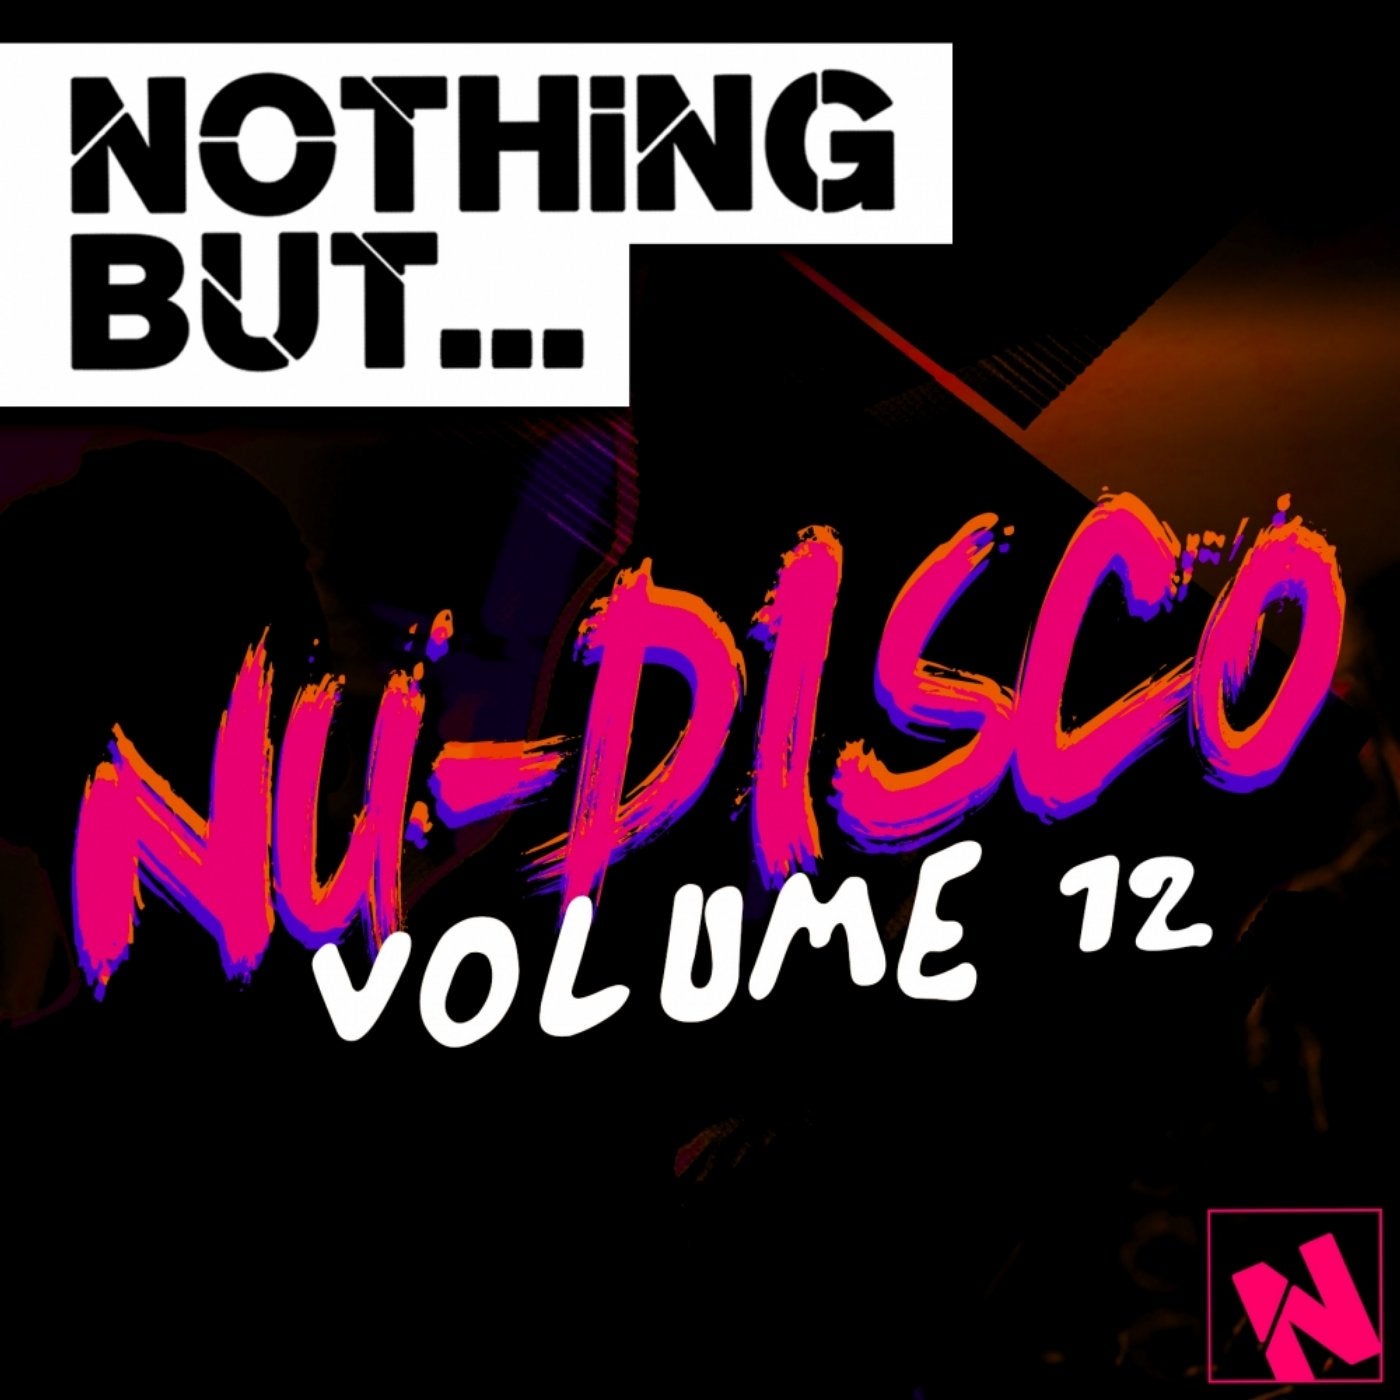 Nothing But... Nu-Disco, Vol. 12